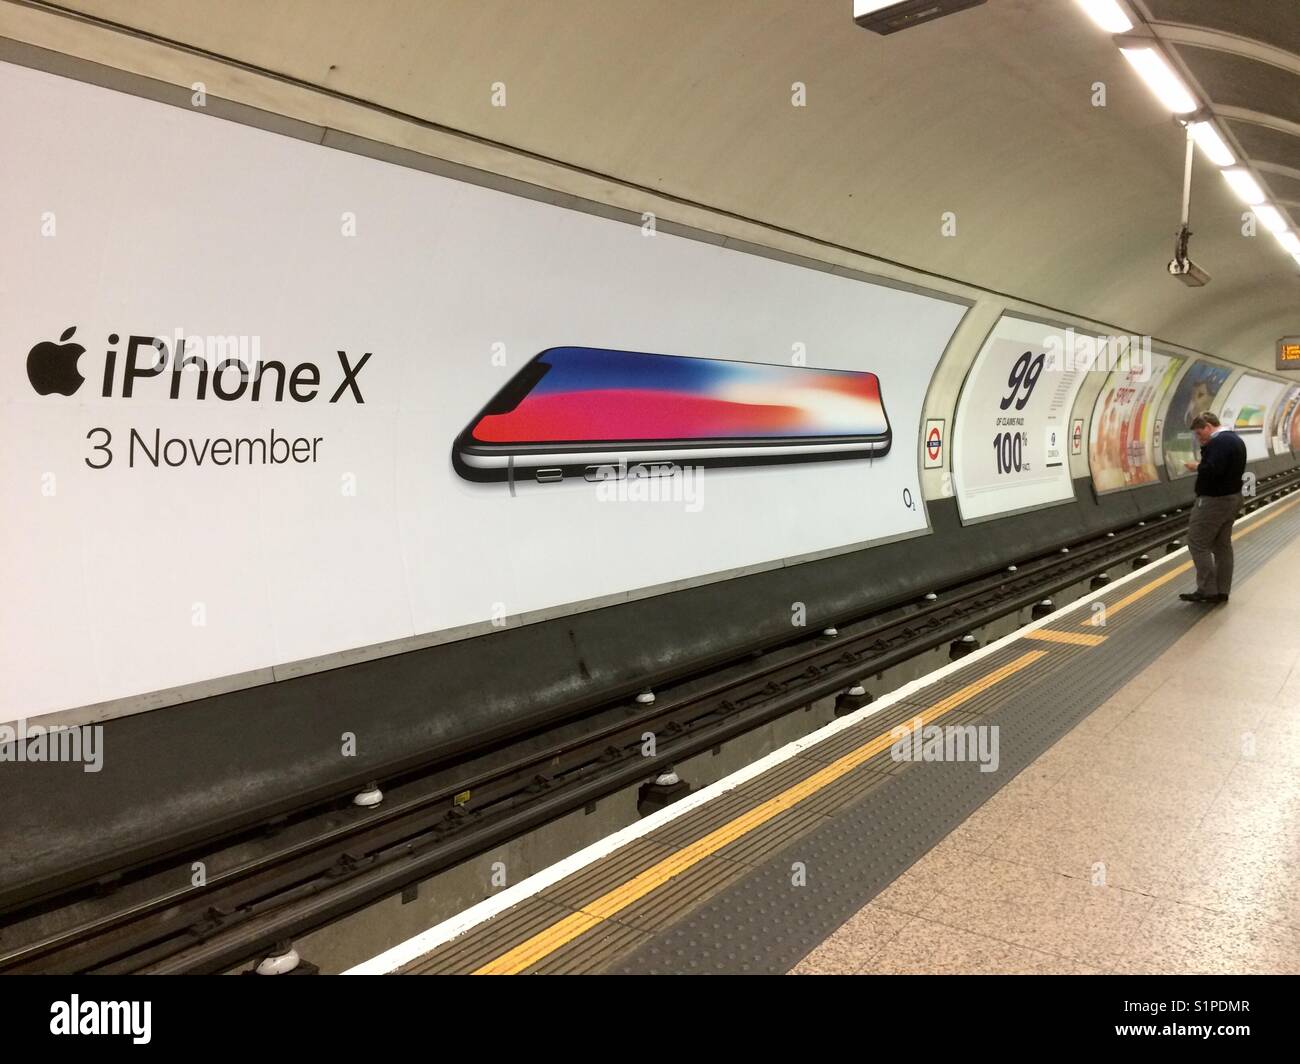 iPhone X advertisement poster on the London Underground ...